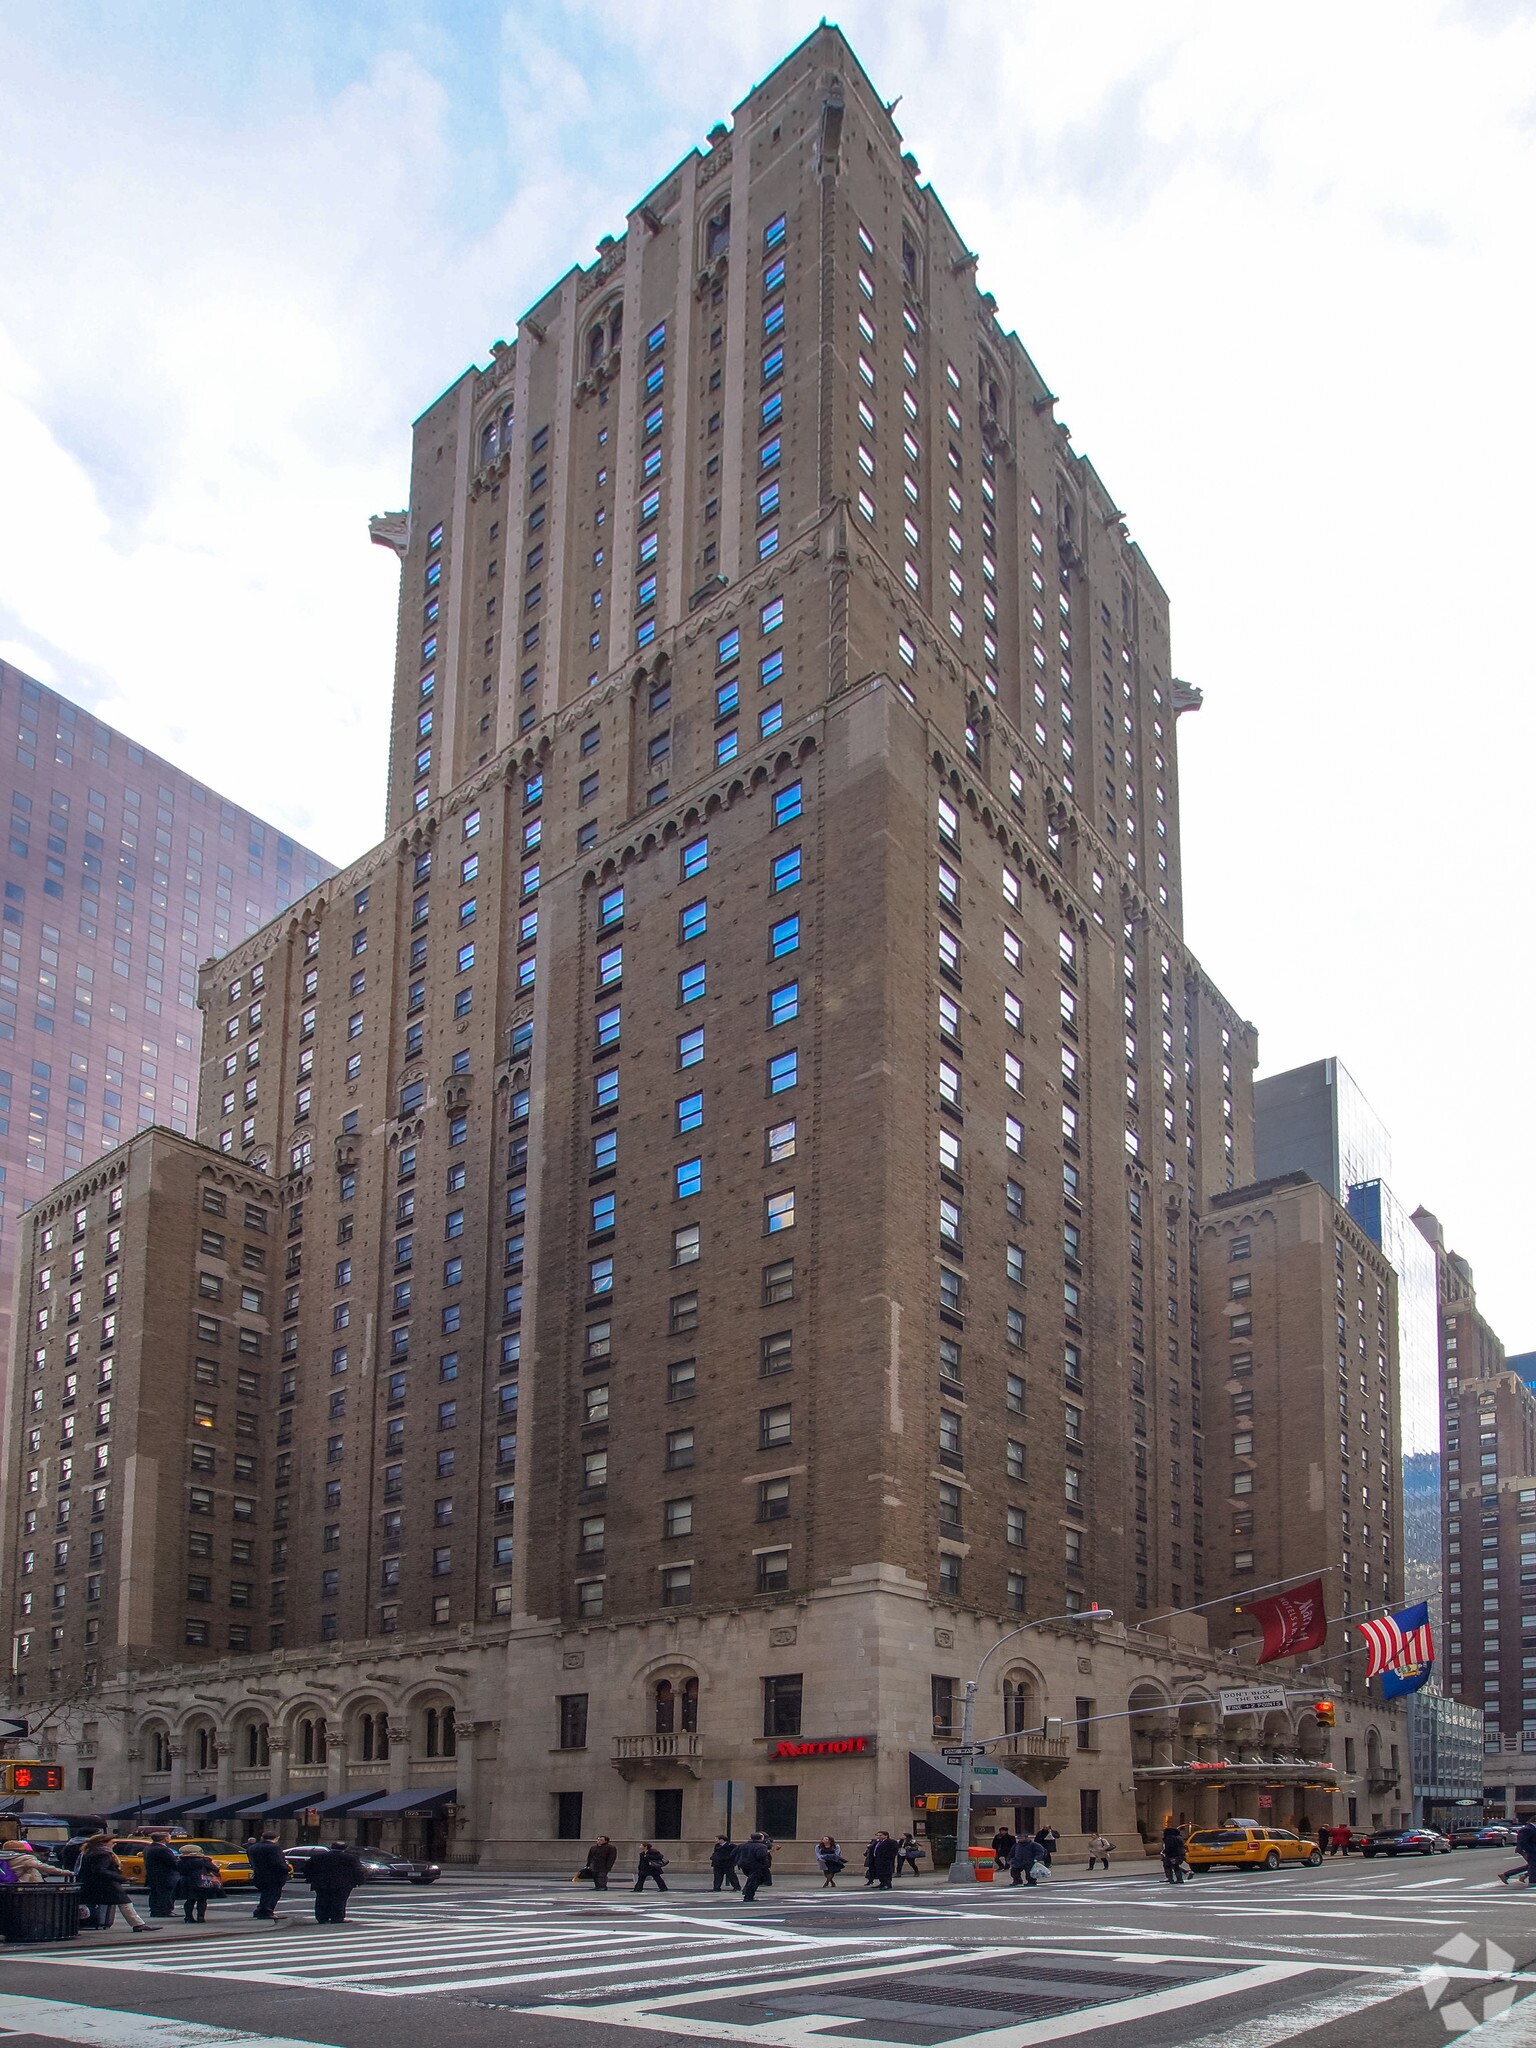 German Fund Manager Sells New York Hotel for 43% Less Than $270 Million Purchase Price